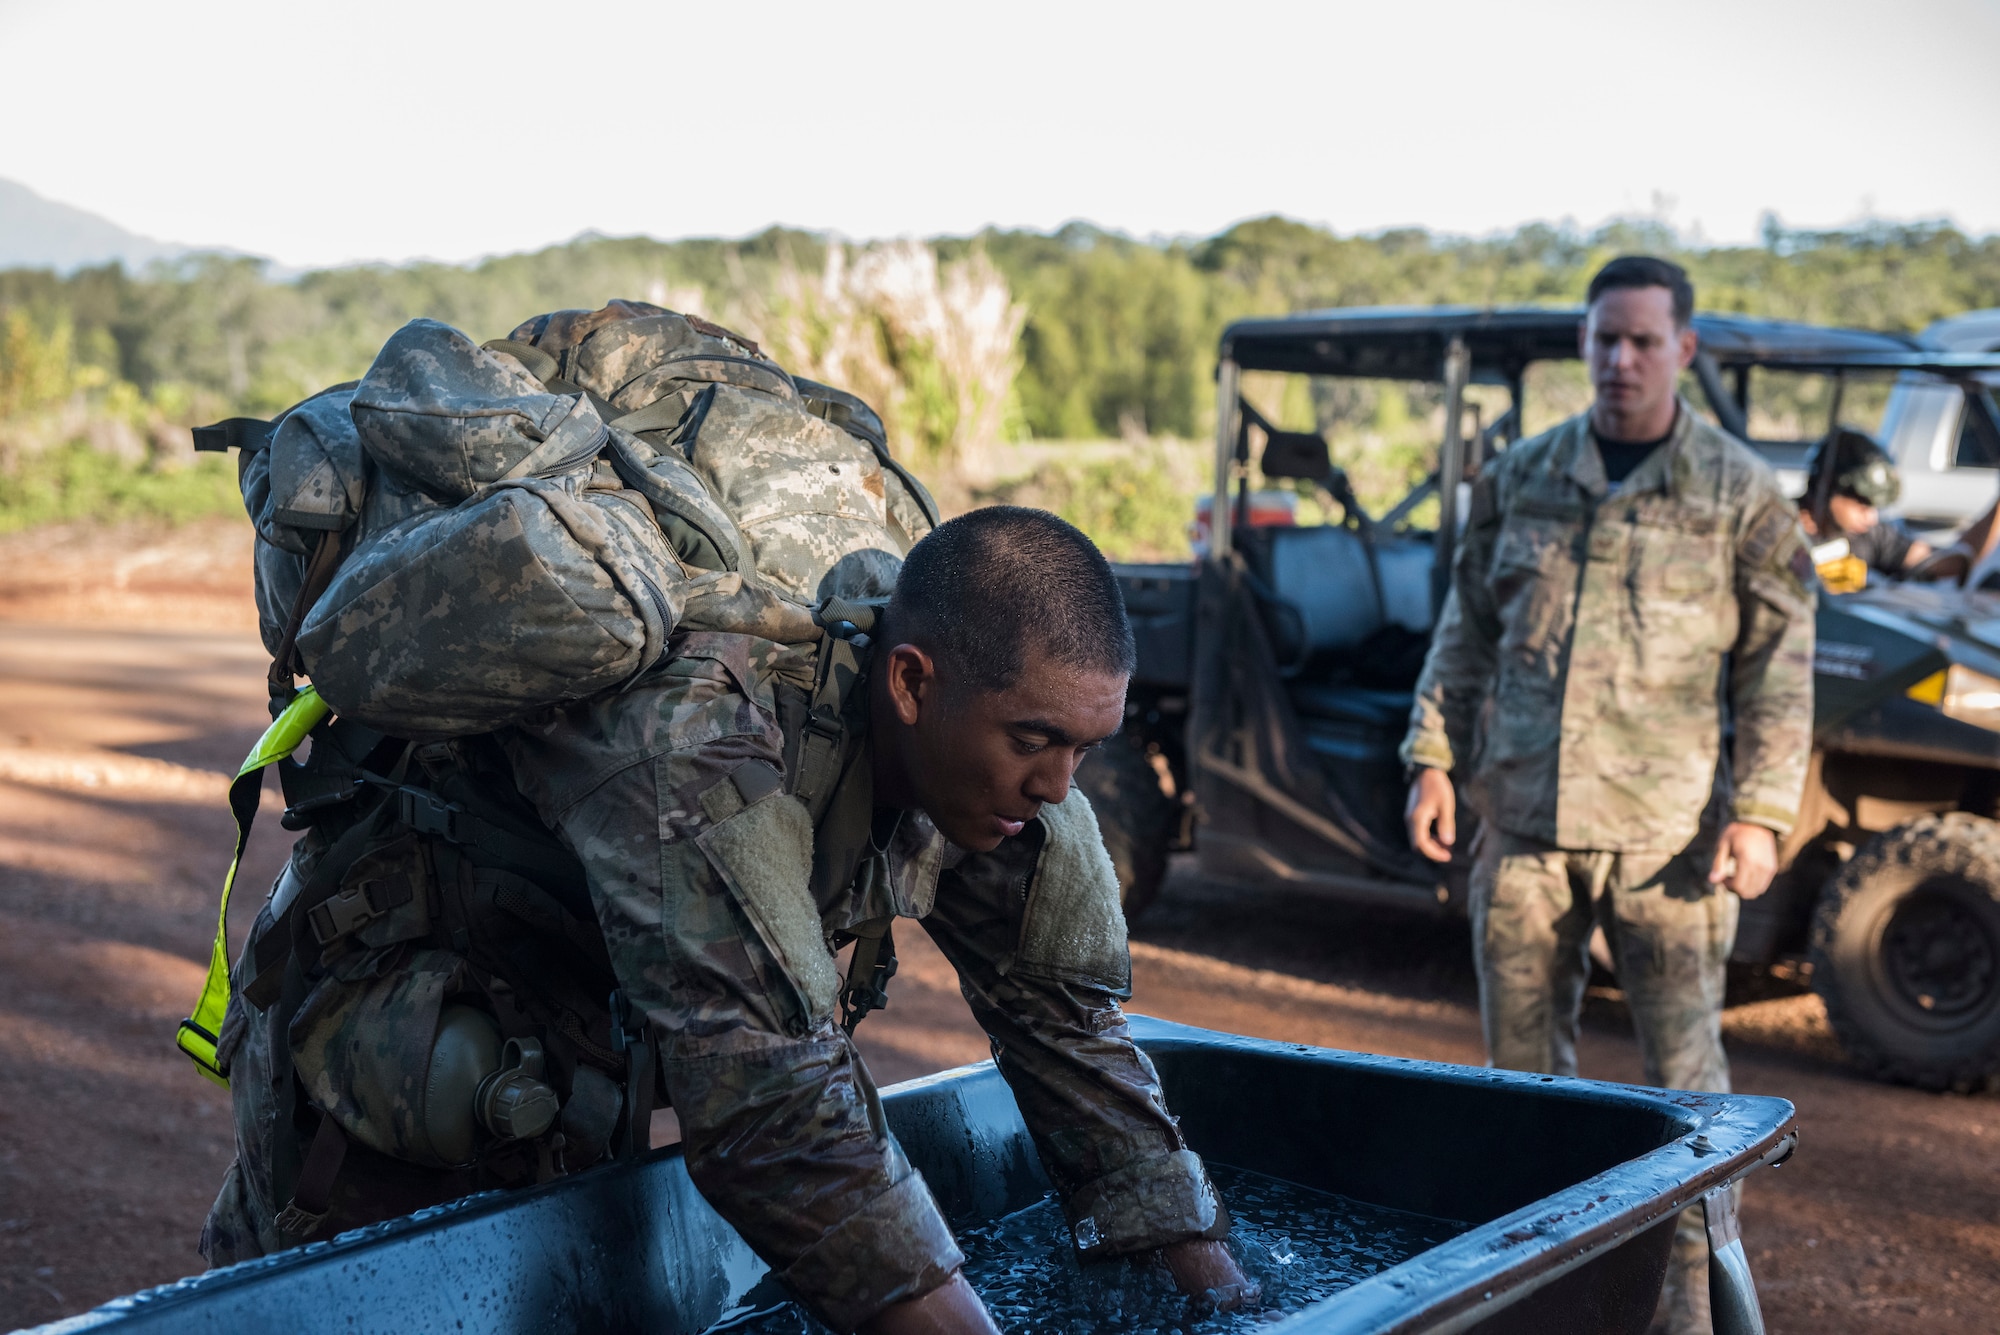 1st Lt. Jeffrey Poekhan, Ranger Assessment Course student, places his arms in ice water during a 12-mile ruck march near Schofield Barracks, Oahu, Hawaii, May 29, 2019. The purpose of the 19-day course is to prepare, assess and evaluate Air Force candidates for Army Ranger School. Of the 23 Airmen who began the Ranger Assessment Course, three dropped for personal motivational reasons and one dropped for medical reasons, leaving 19 standing at the end. Out of the 19, 11 Airmen met all the standards needed for a recommendation to go forward to Ranger School. (U.S. Air Force photo by Staff Sgt. Hailey Haux)